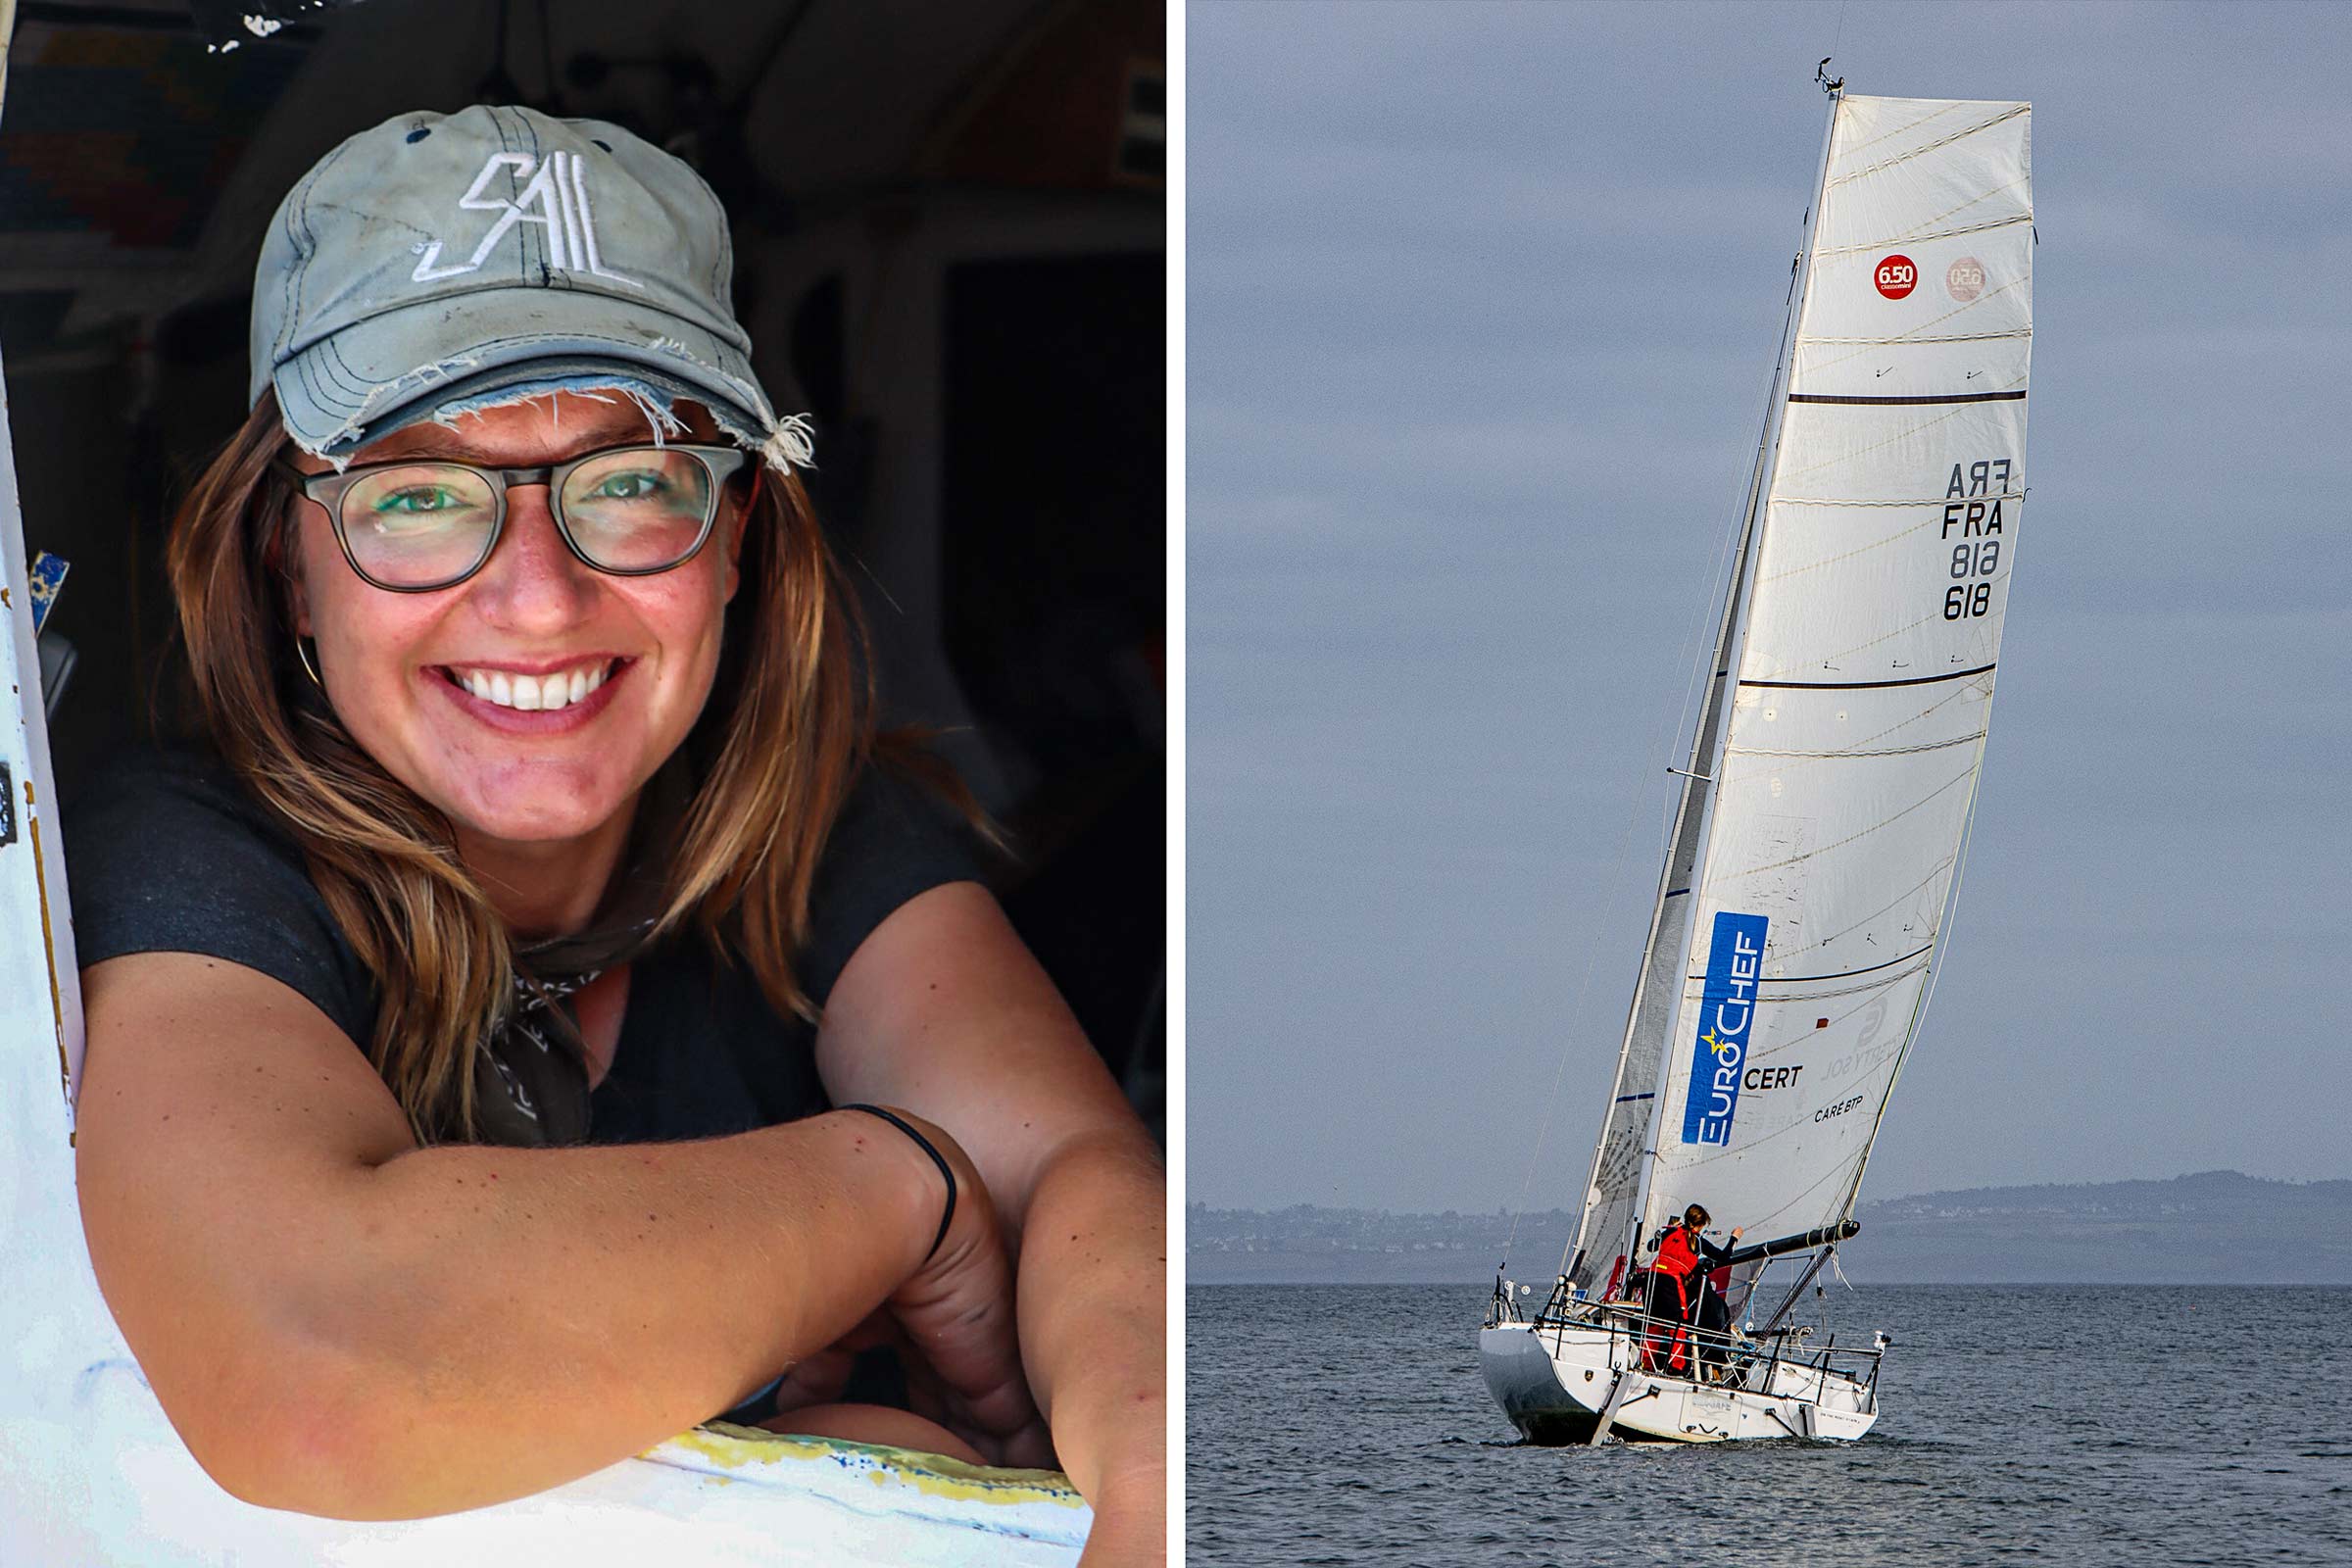 A portrait of Hasson with her lucky hat on the left and Hasson on her sailboat on the right